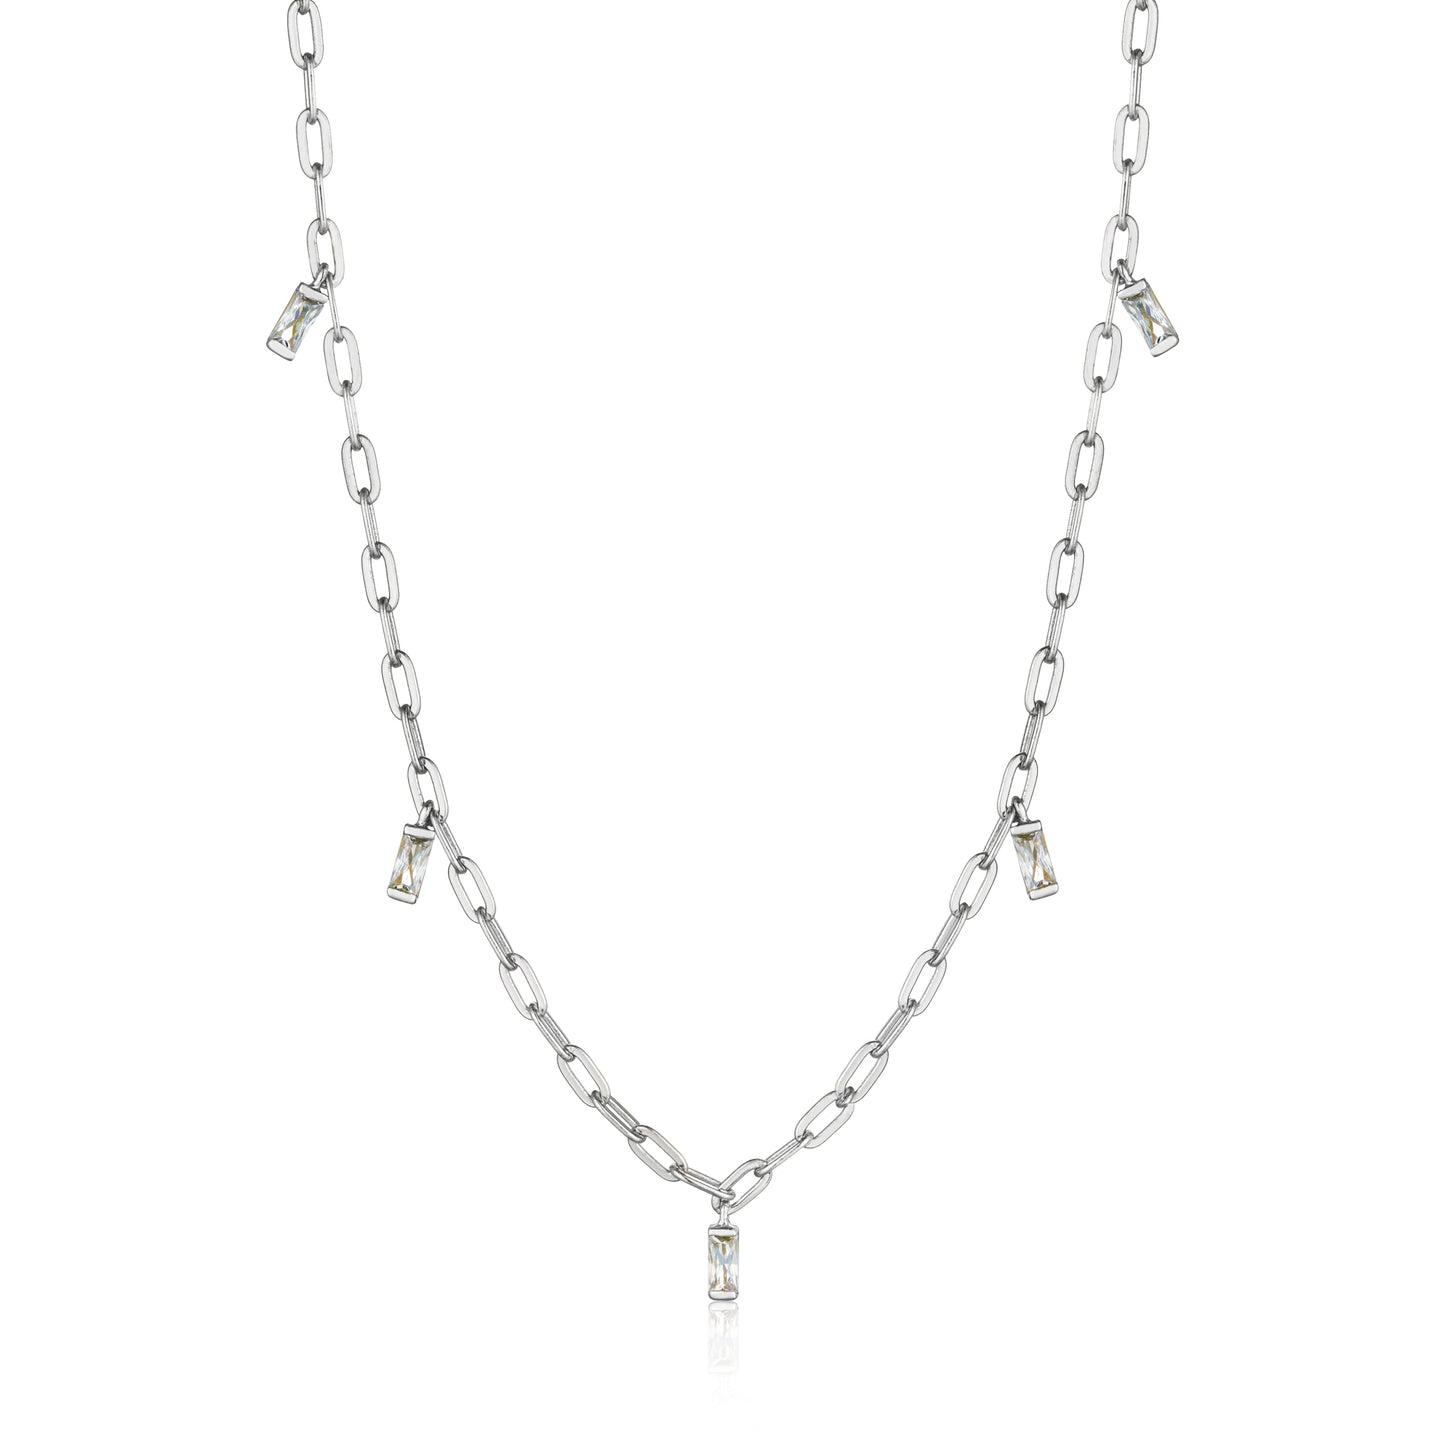 Ania Haie Glow Drop Necklace - Silver Necklace